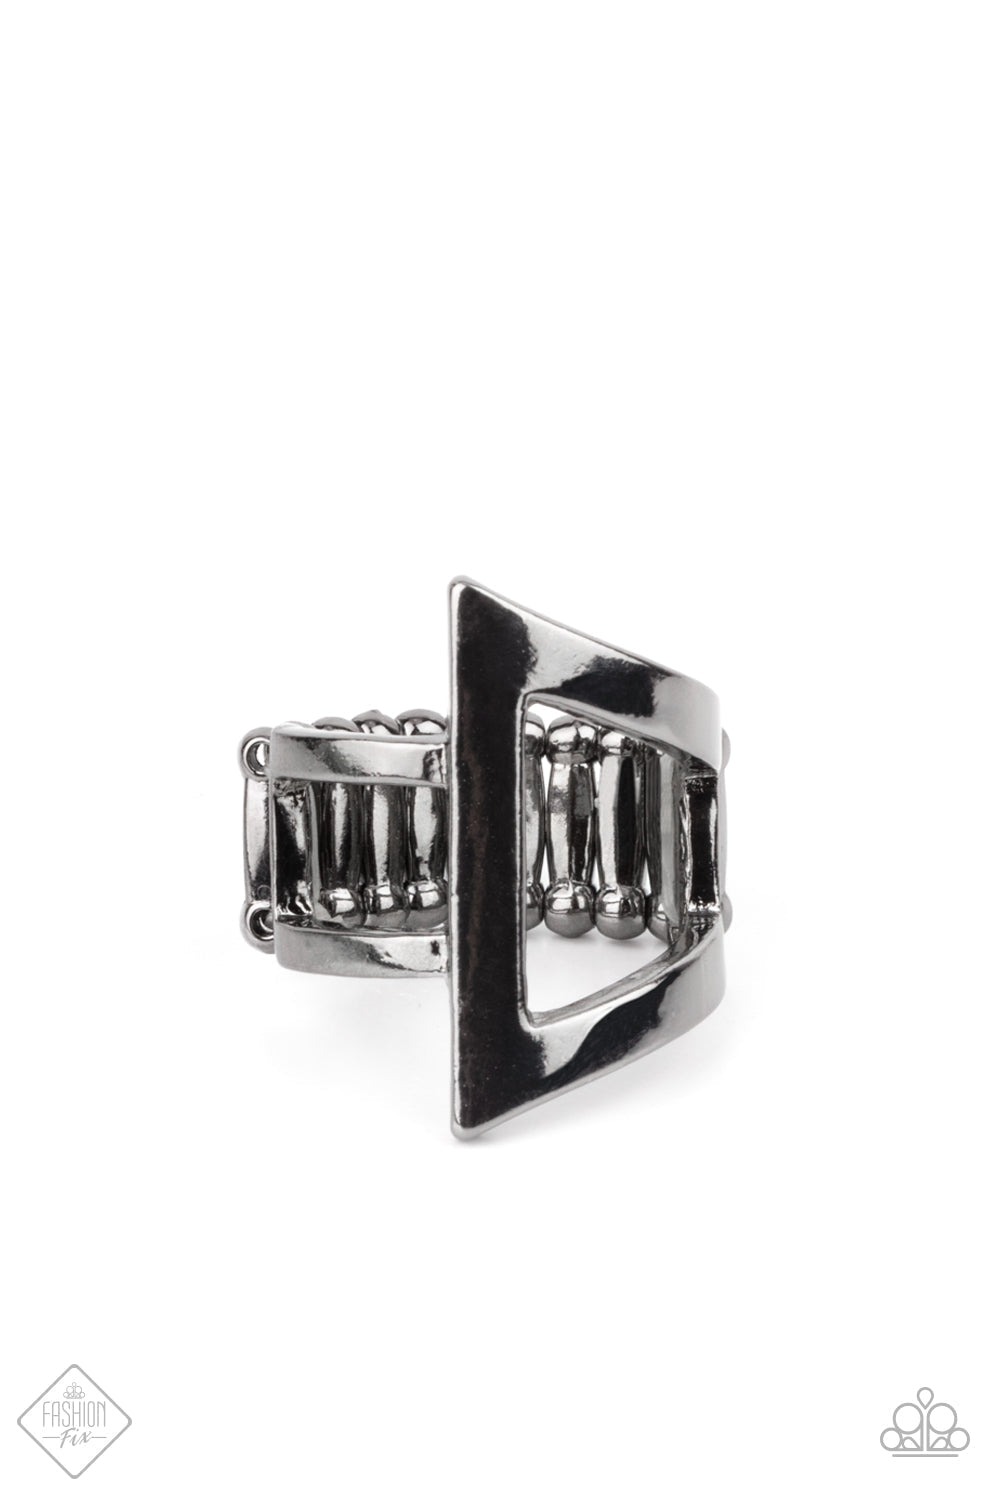 Rebel Edge - Black Metal Fashion Ring - Paparazzi Accessories - Featuring a high sheen finish, flared gunmetal bars create a bold asymmetrical triangle atop the finger. Two small gunmetal bars wrap around the side for an edgy modern finish. Features a stretchy band for a flexible fit. Sold as one individual ring.